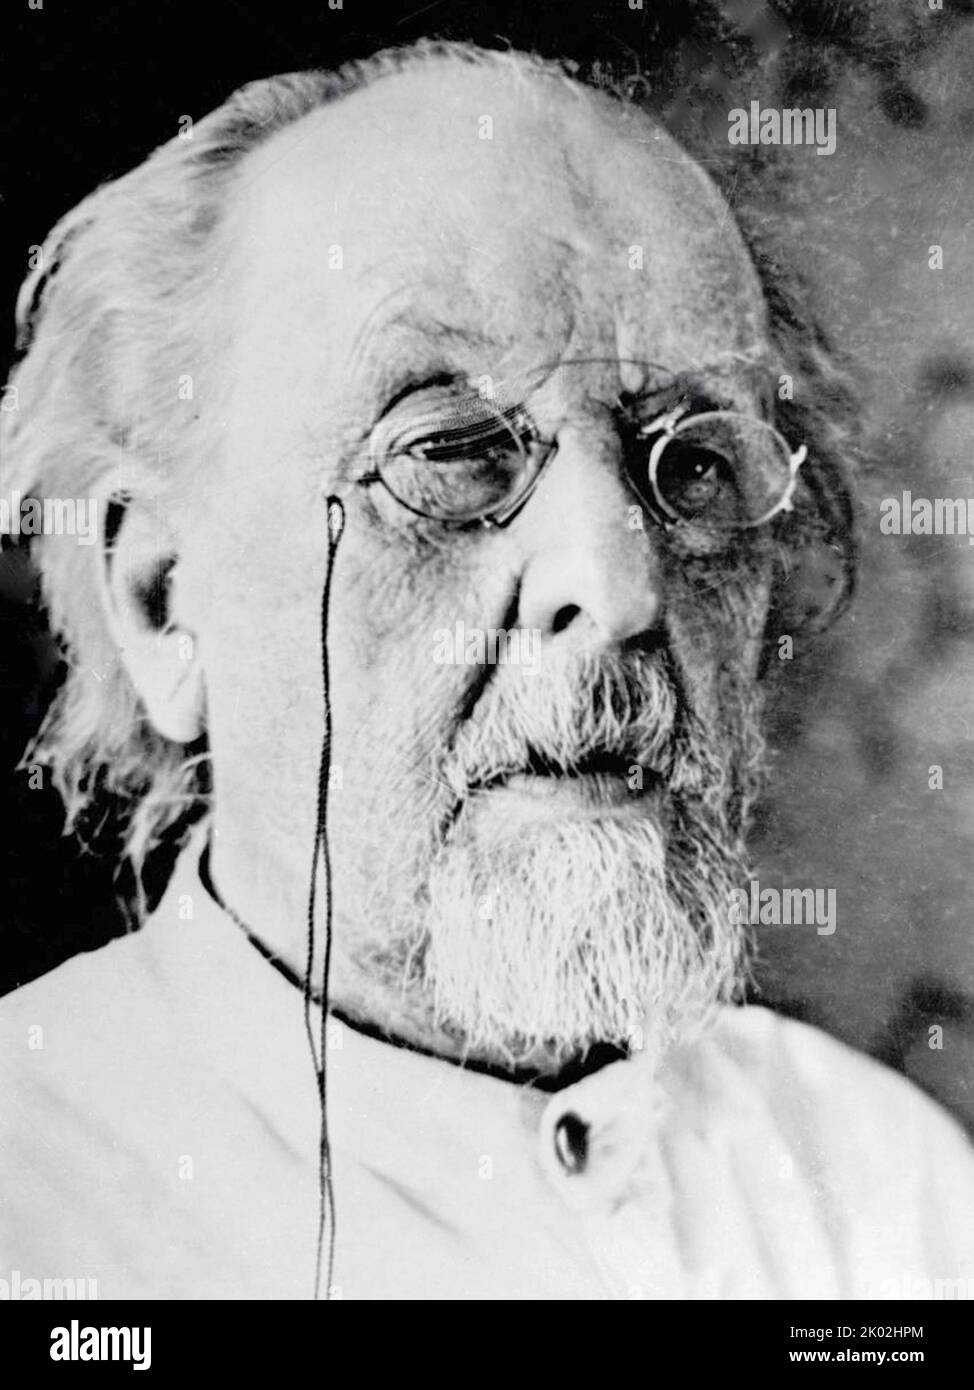 Cosmonautics founder Konstantin Eduardovich Tsiolkovsky (1857 - 1935) was a Russian and Soviet rocket scientist and pioneer of the astronautic theory. Stock Photo